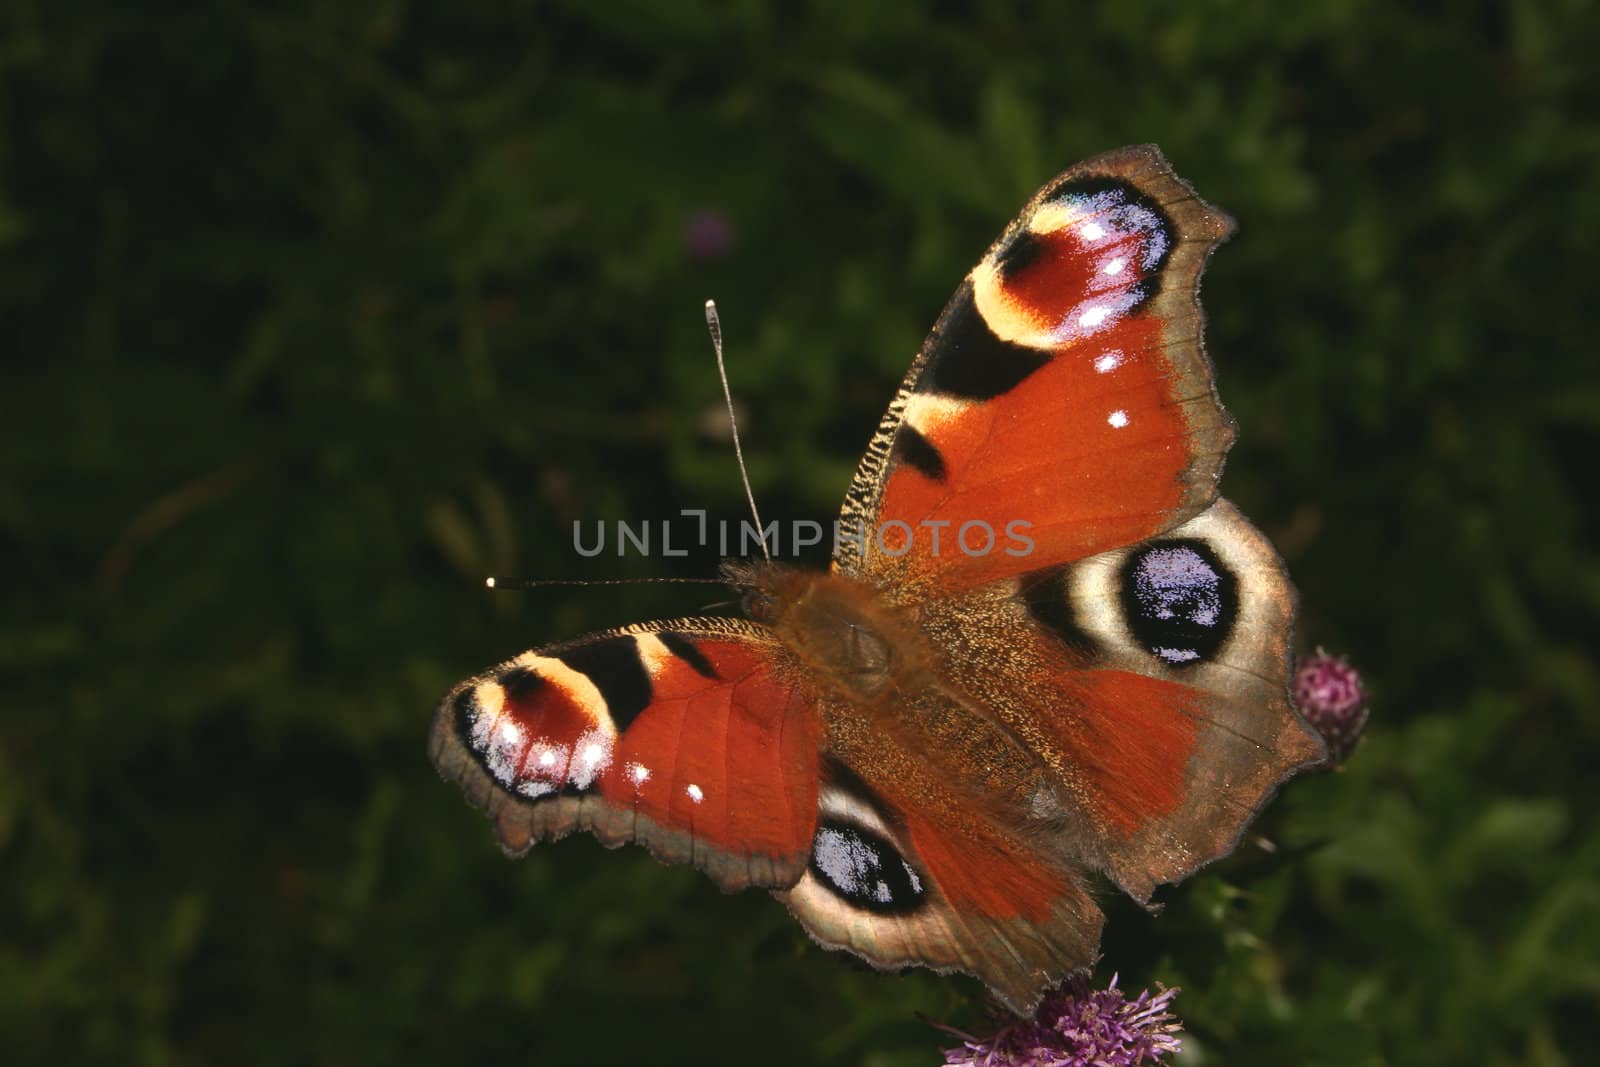 European Peacock (Inachis io) by tdietrich